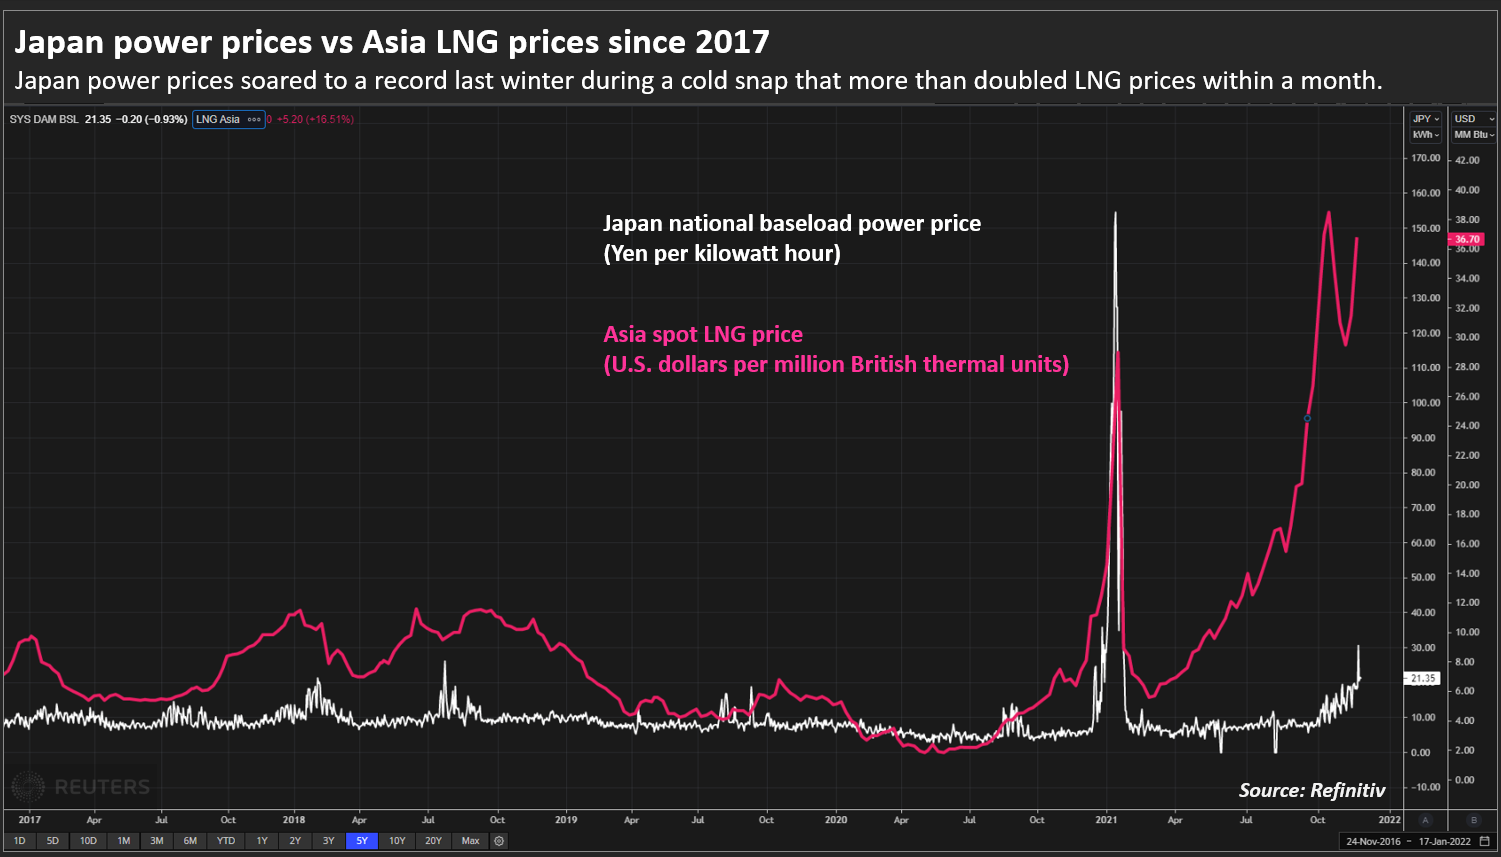 Japan power prices vs Asia LNG prices since 2017